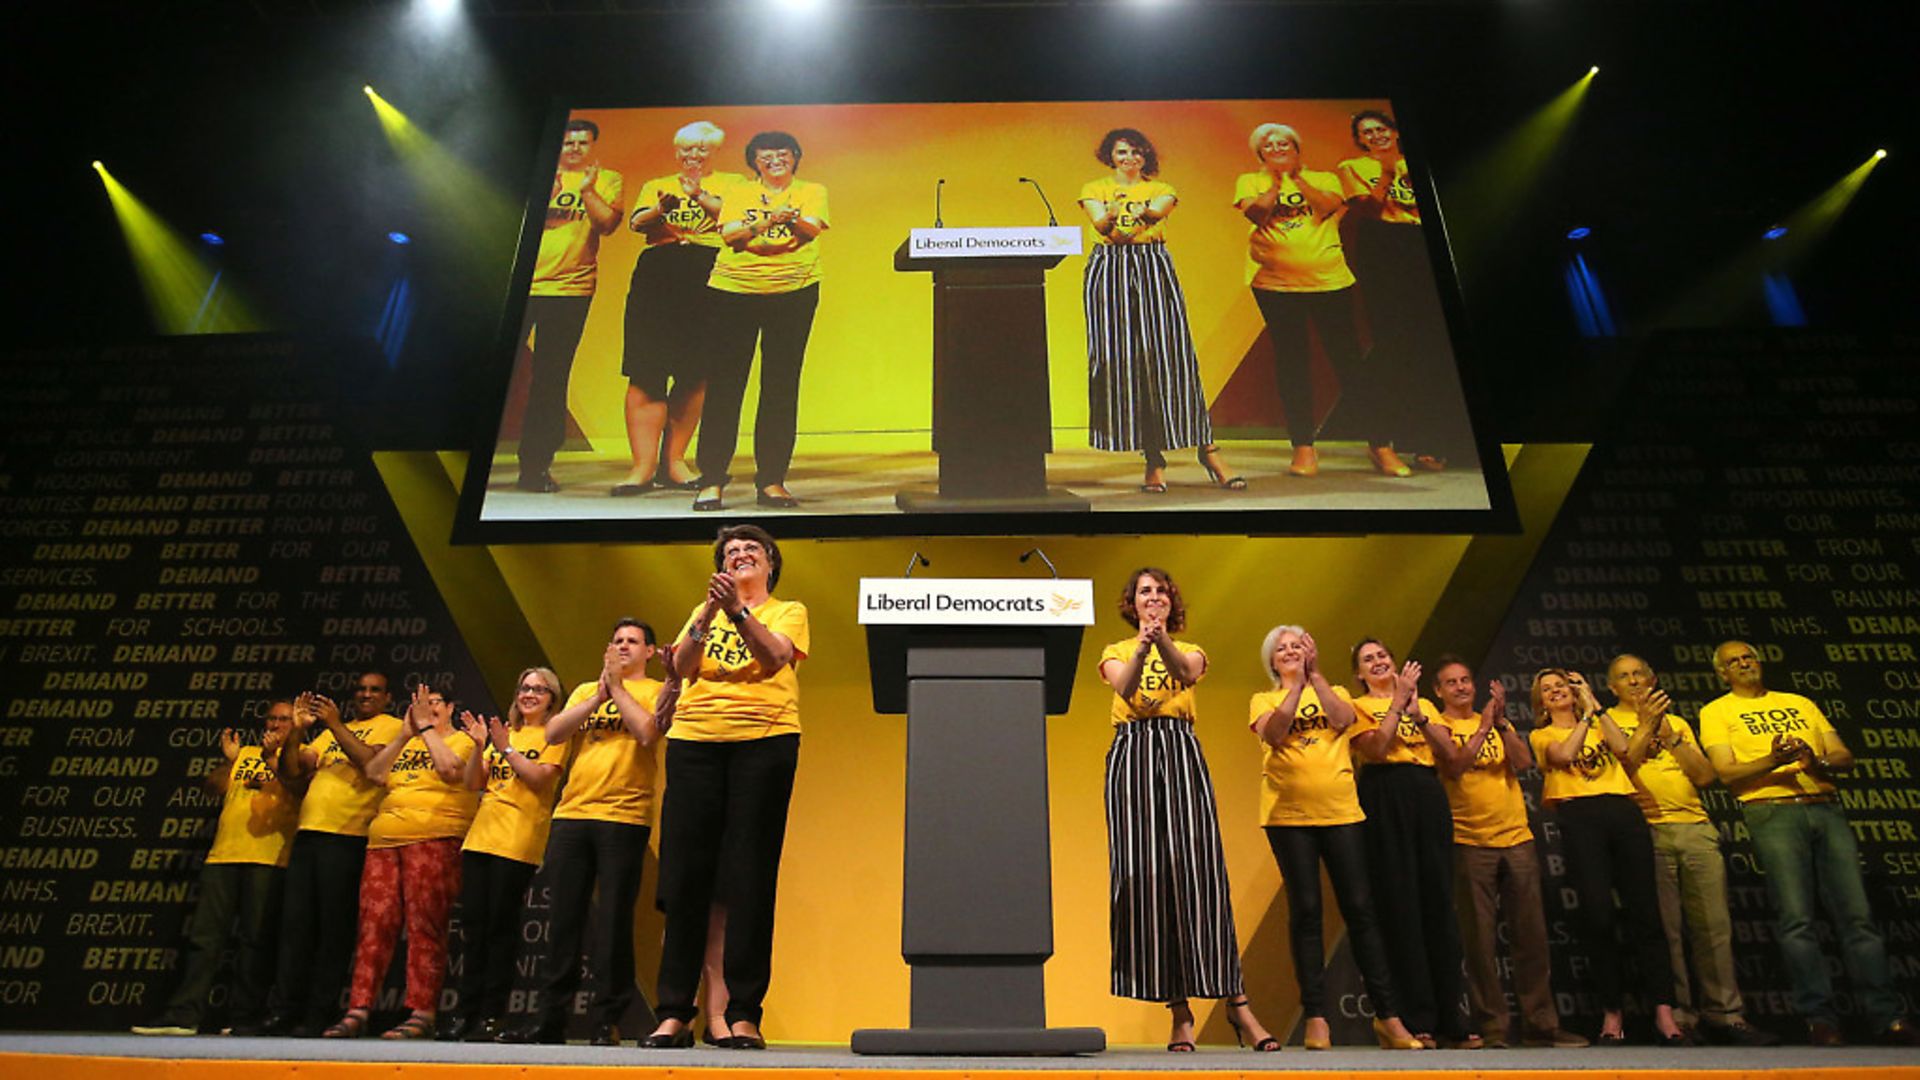 Lib Dem MEPs on stage at the Liberal Democrats conference. Photograph: Jonathan Brady/PA. - Credit: PA Wire/PA Images